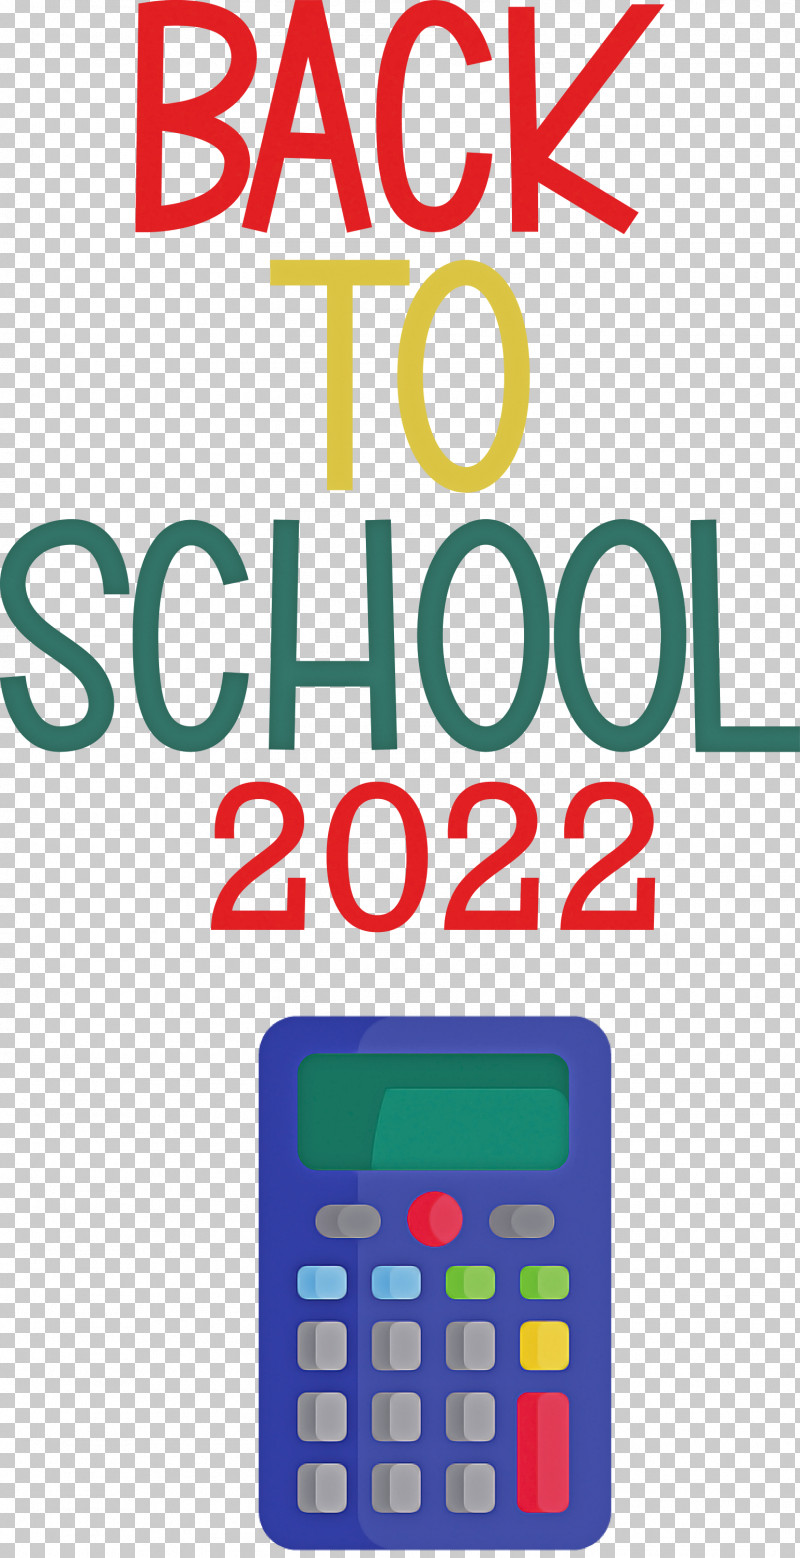 Back To School 2022 PNG, Clipart, Calculator, Geometry, Line, Logo, Mathematics Free PNG Download